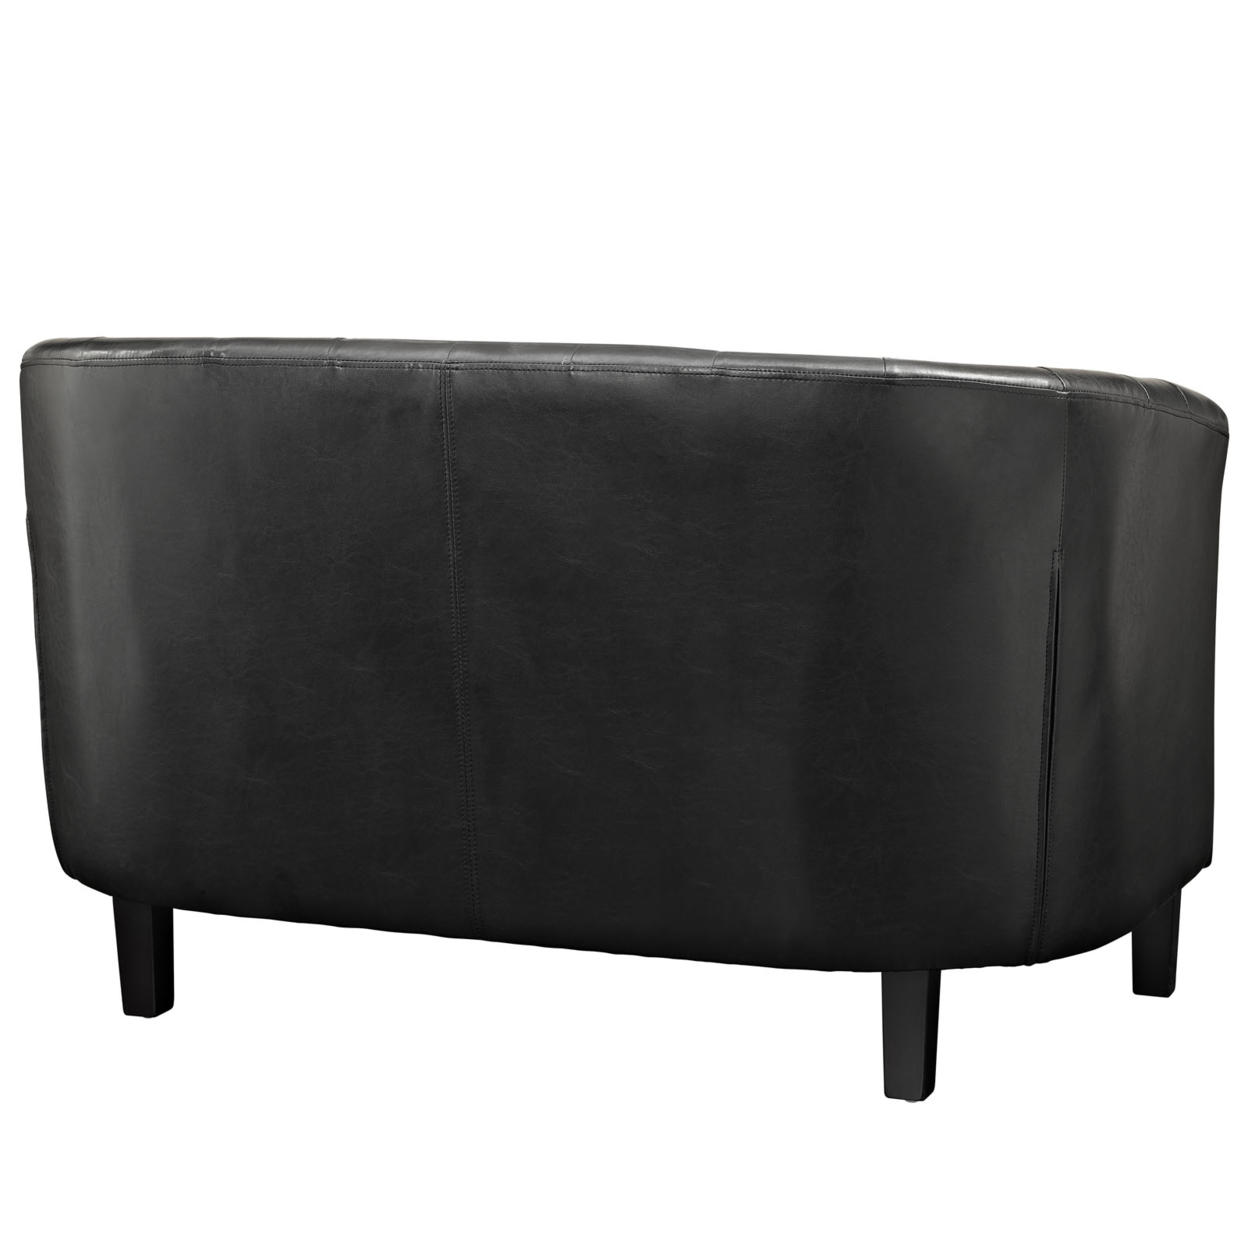 49 Inch Curved Loveseat, Deep Button Tufting, Black Faux Leather